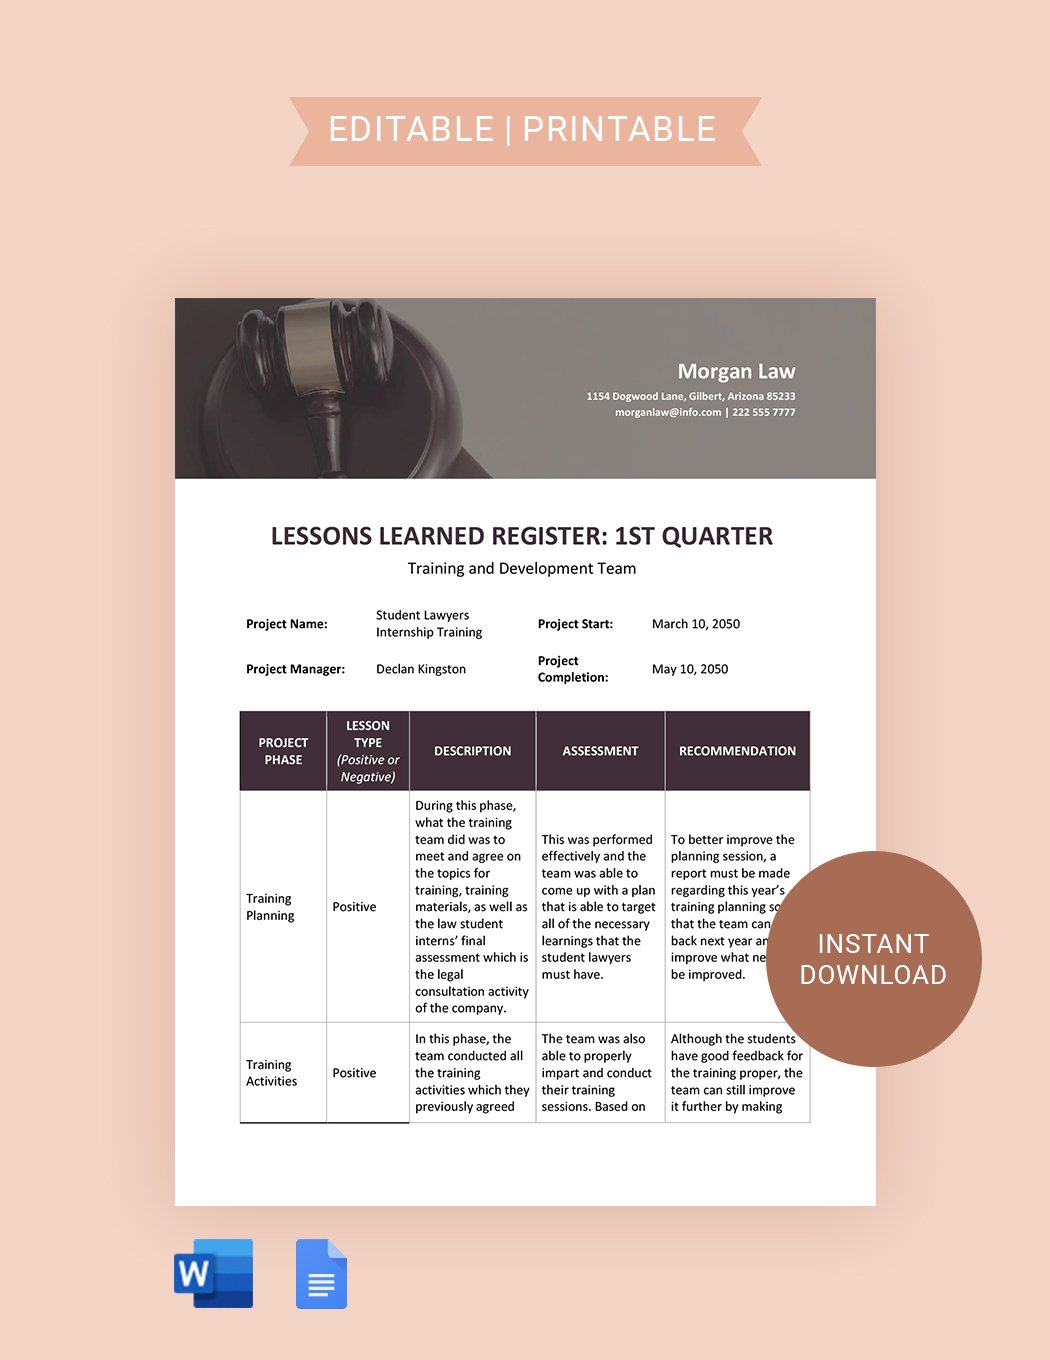 Free Lessons Learned Register Template in Word, Google Docs